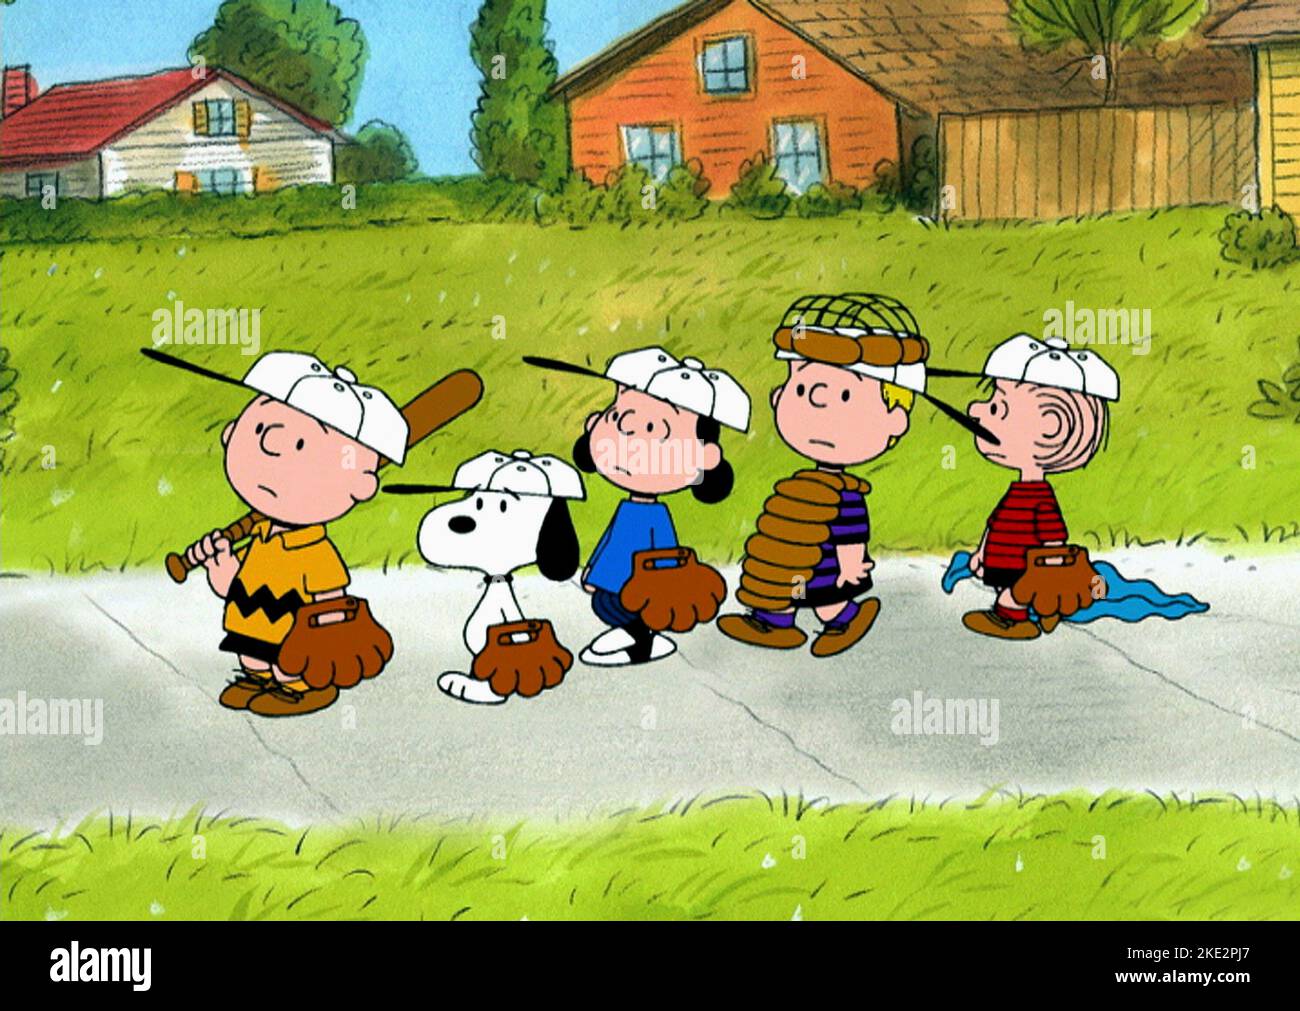 LUCY MUST BE TRADED  CHARLIE BROWN, CHARLIE BROWN, SNOOPY, LUCY, SCHROEDER, LINUS, 2003 Stock Photo